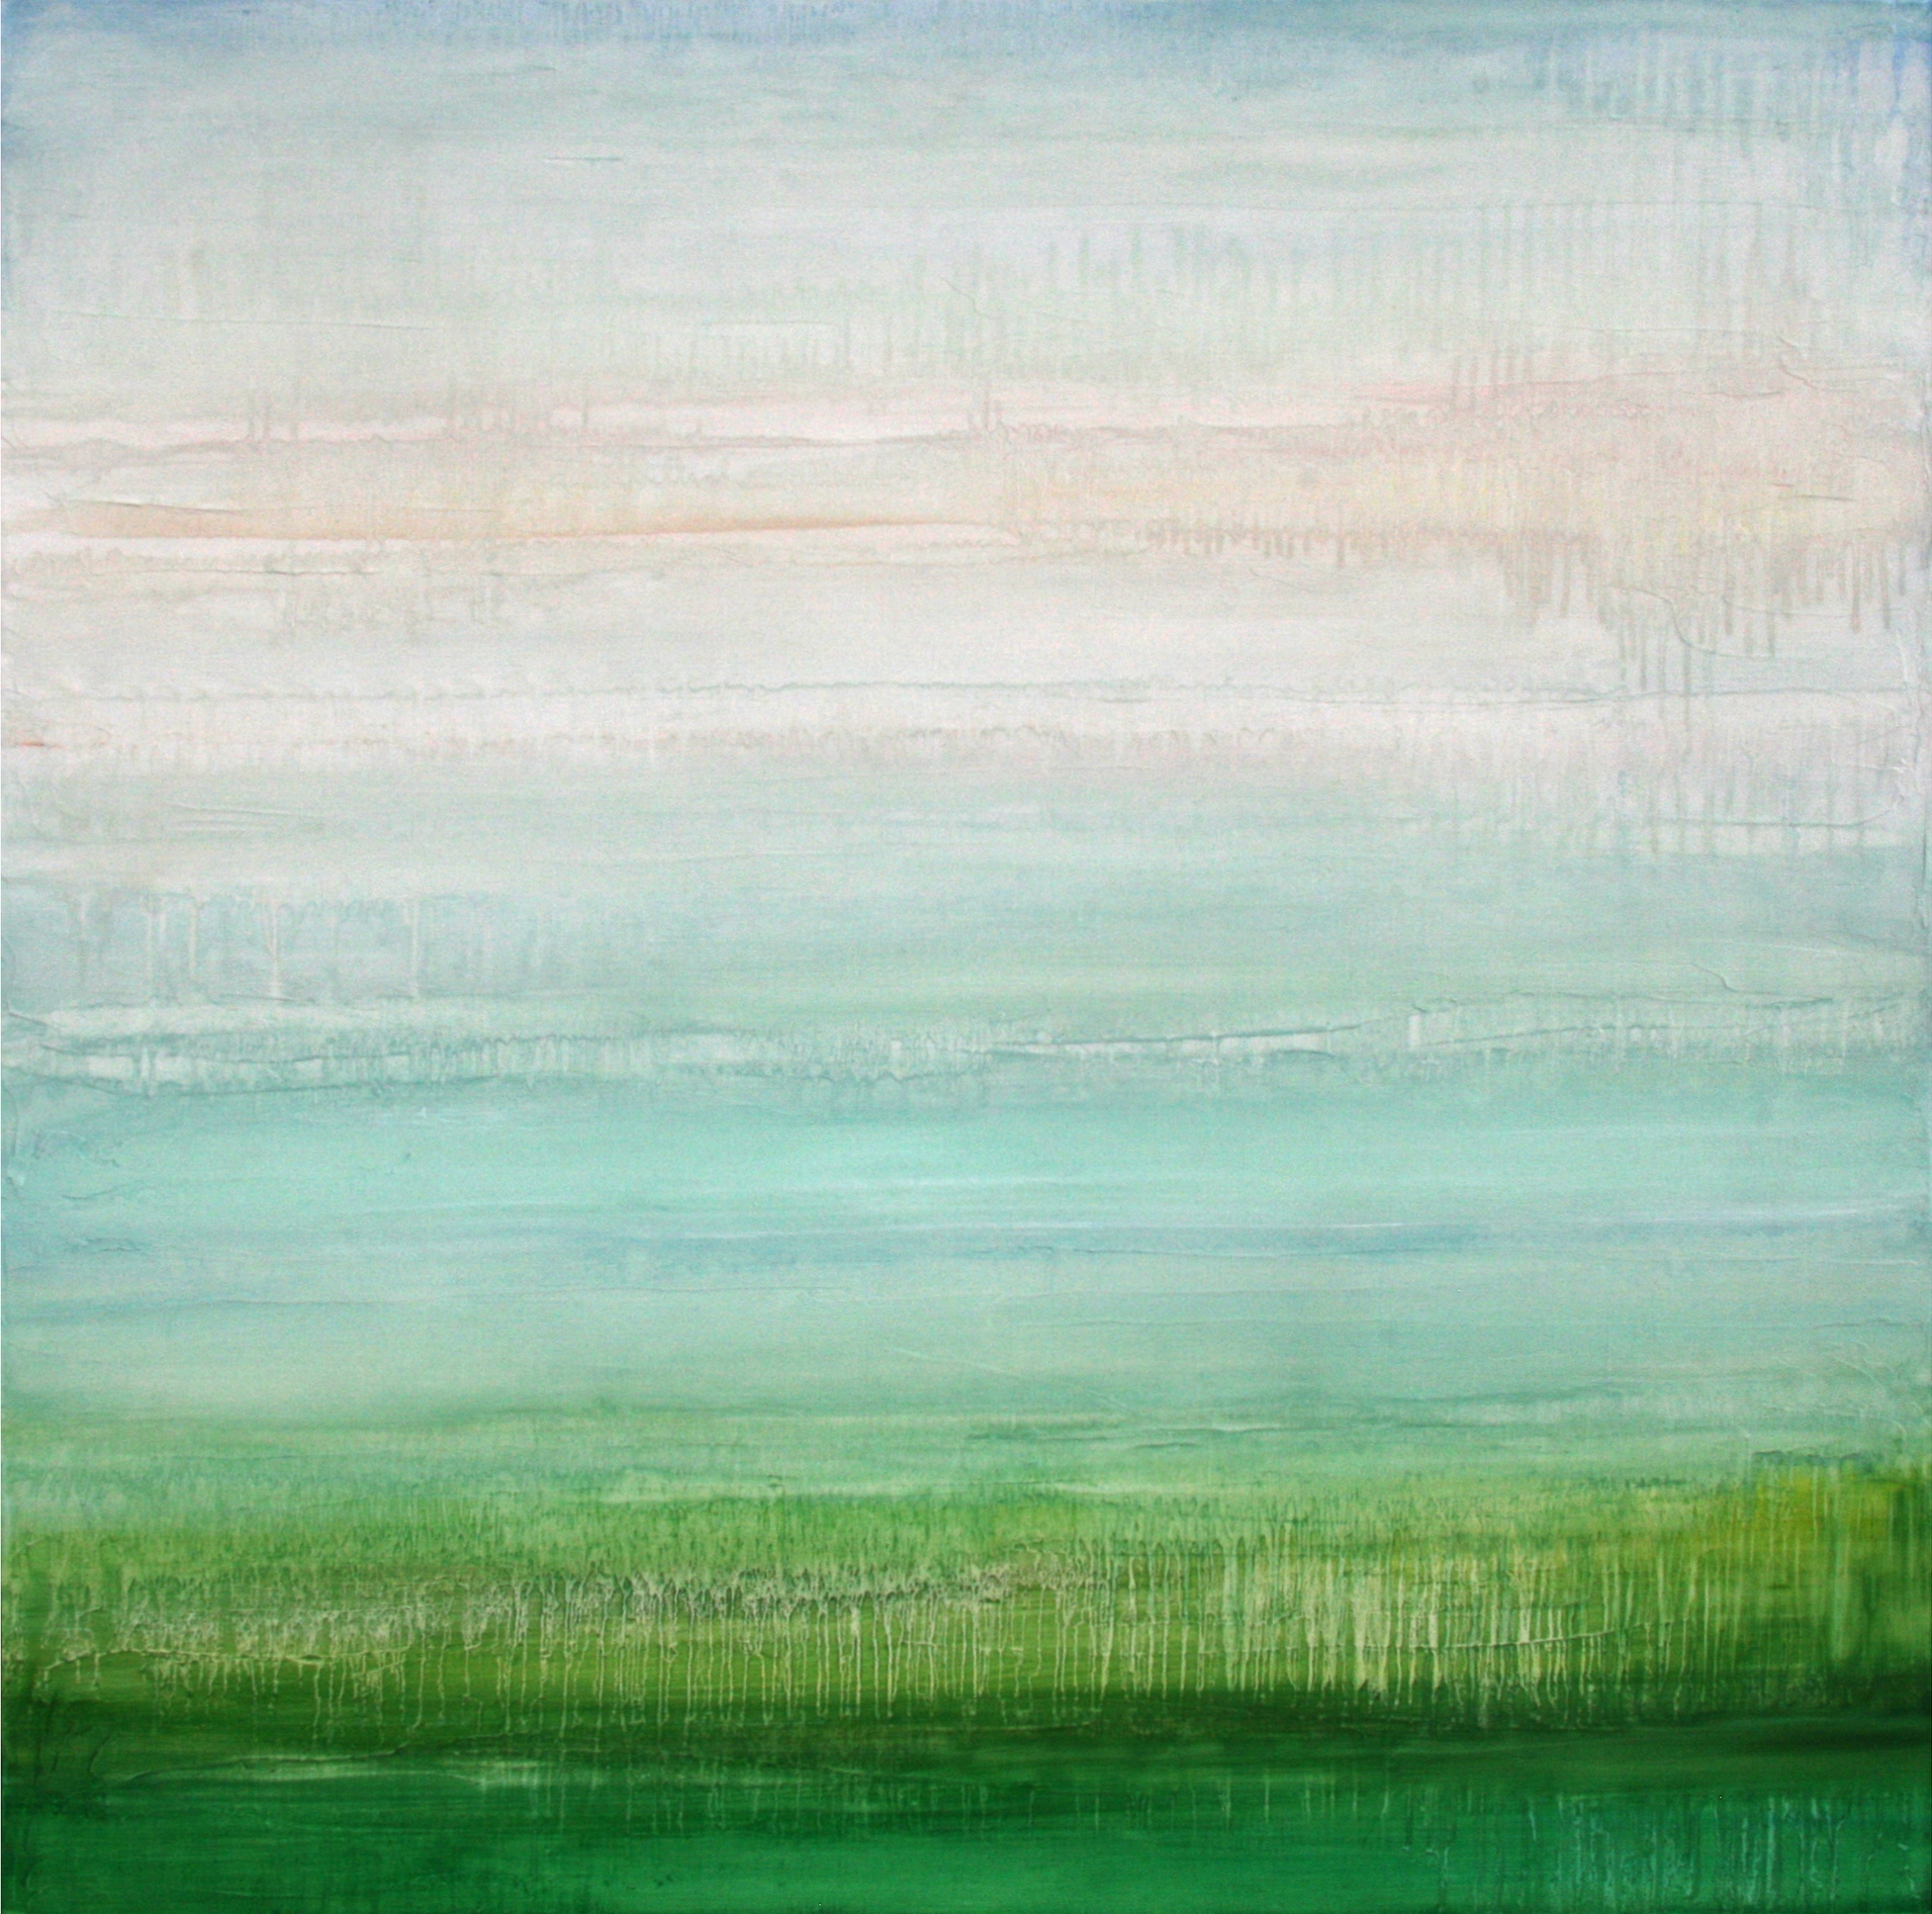 Mint, 36 x 36 inches